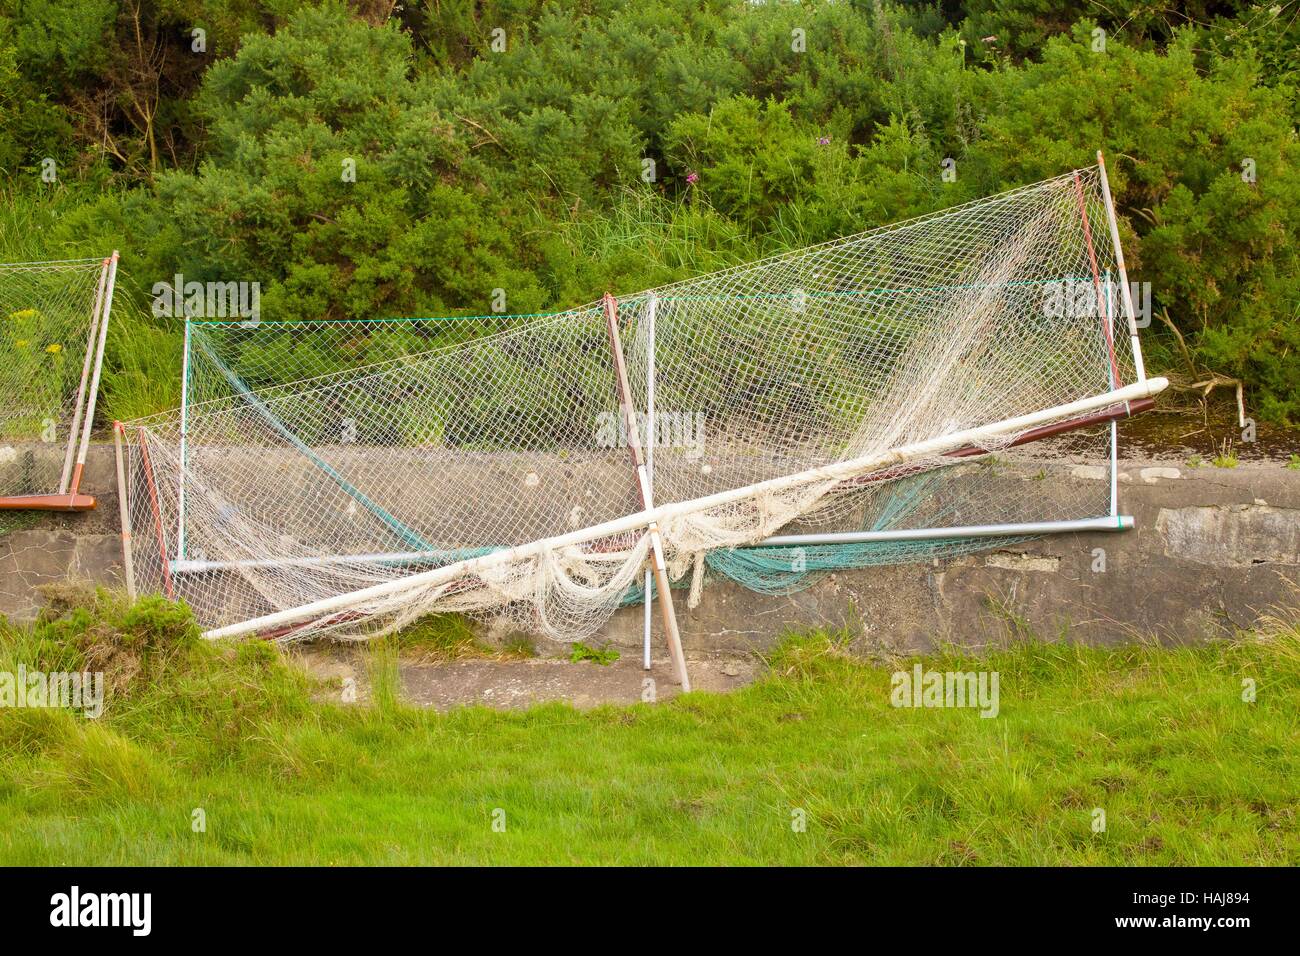 Haaf Nets drying in the sun. Bowness on Solway, Solway Coast, Cumbria, England, United Kingdom, Europe. Stock Photo